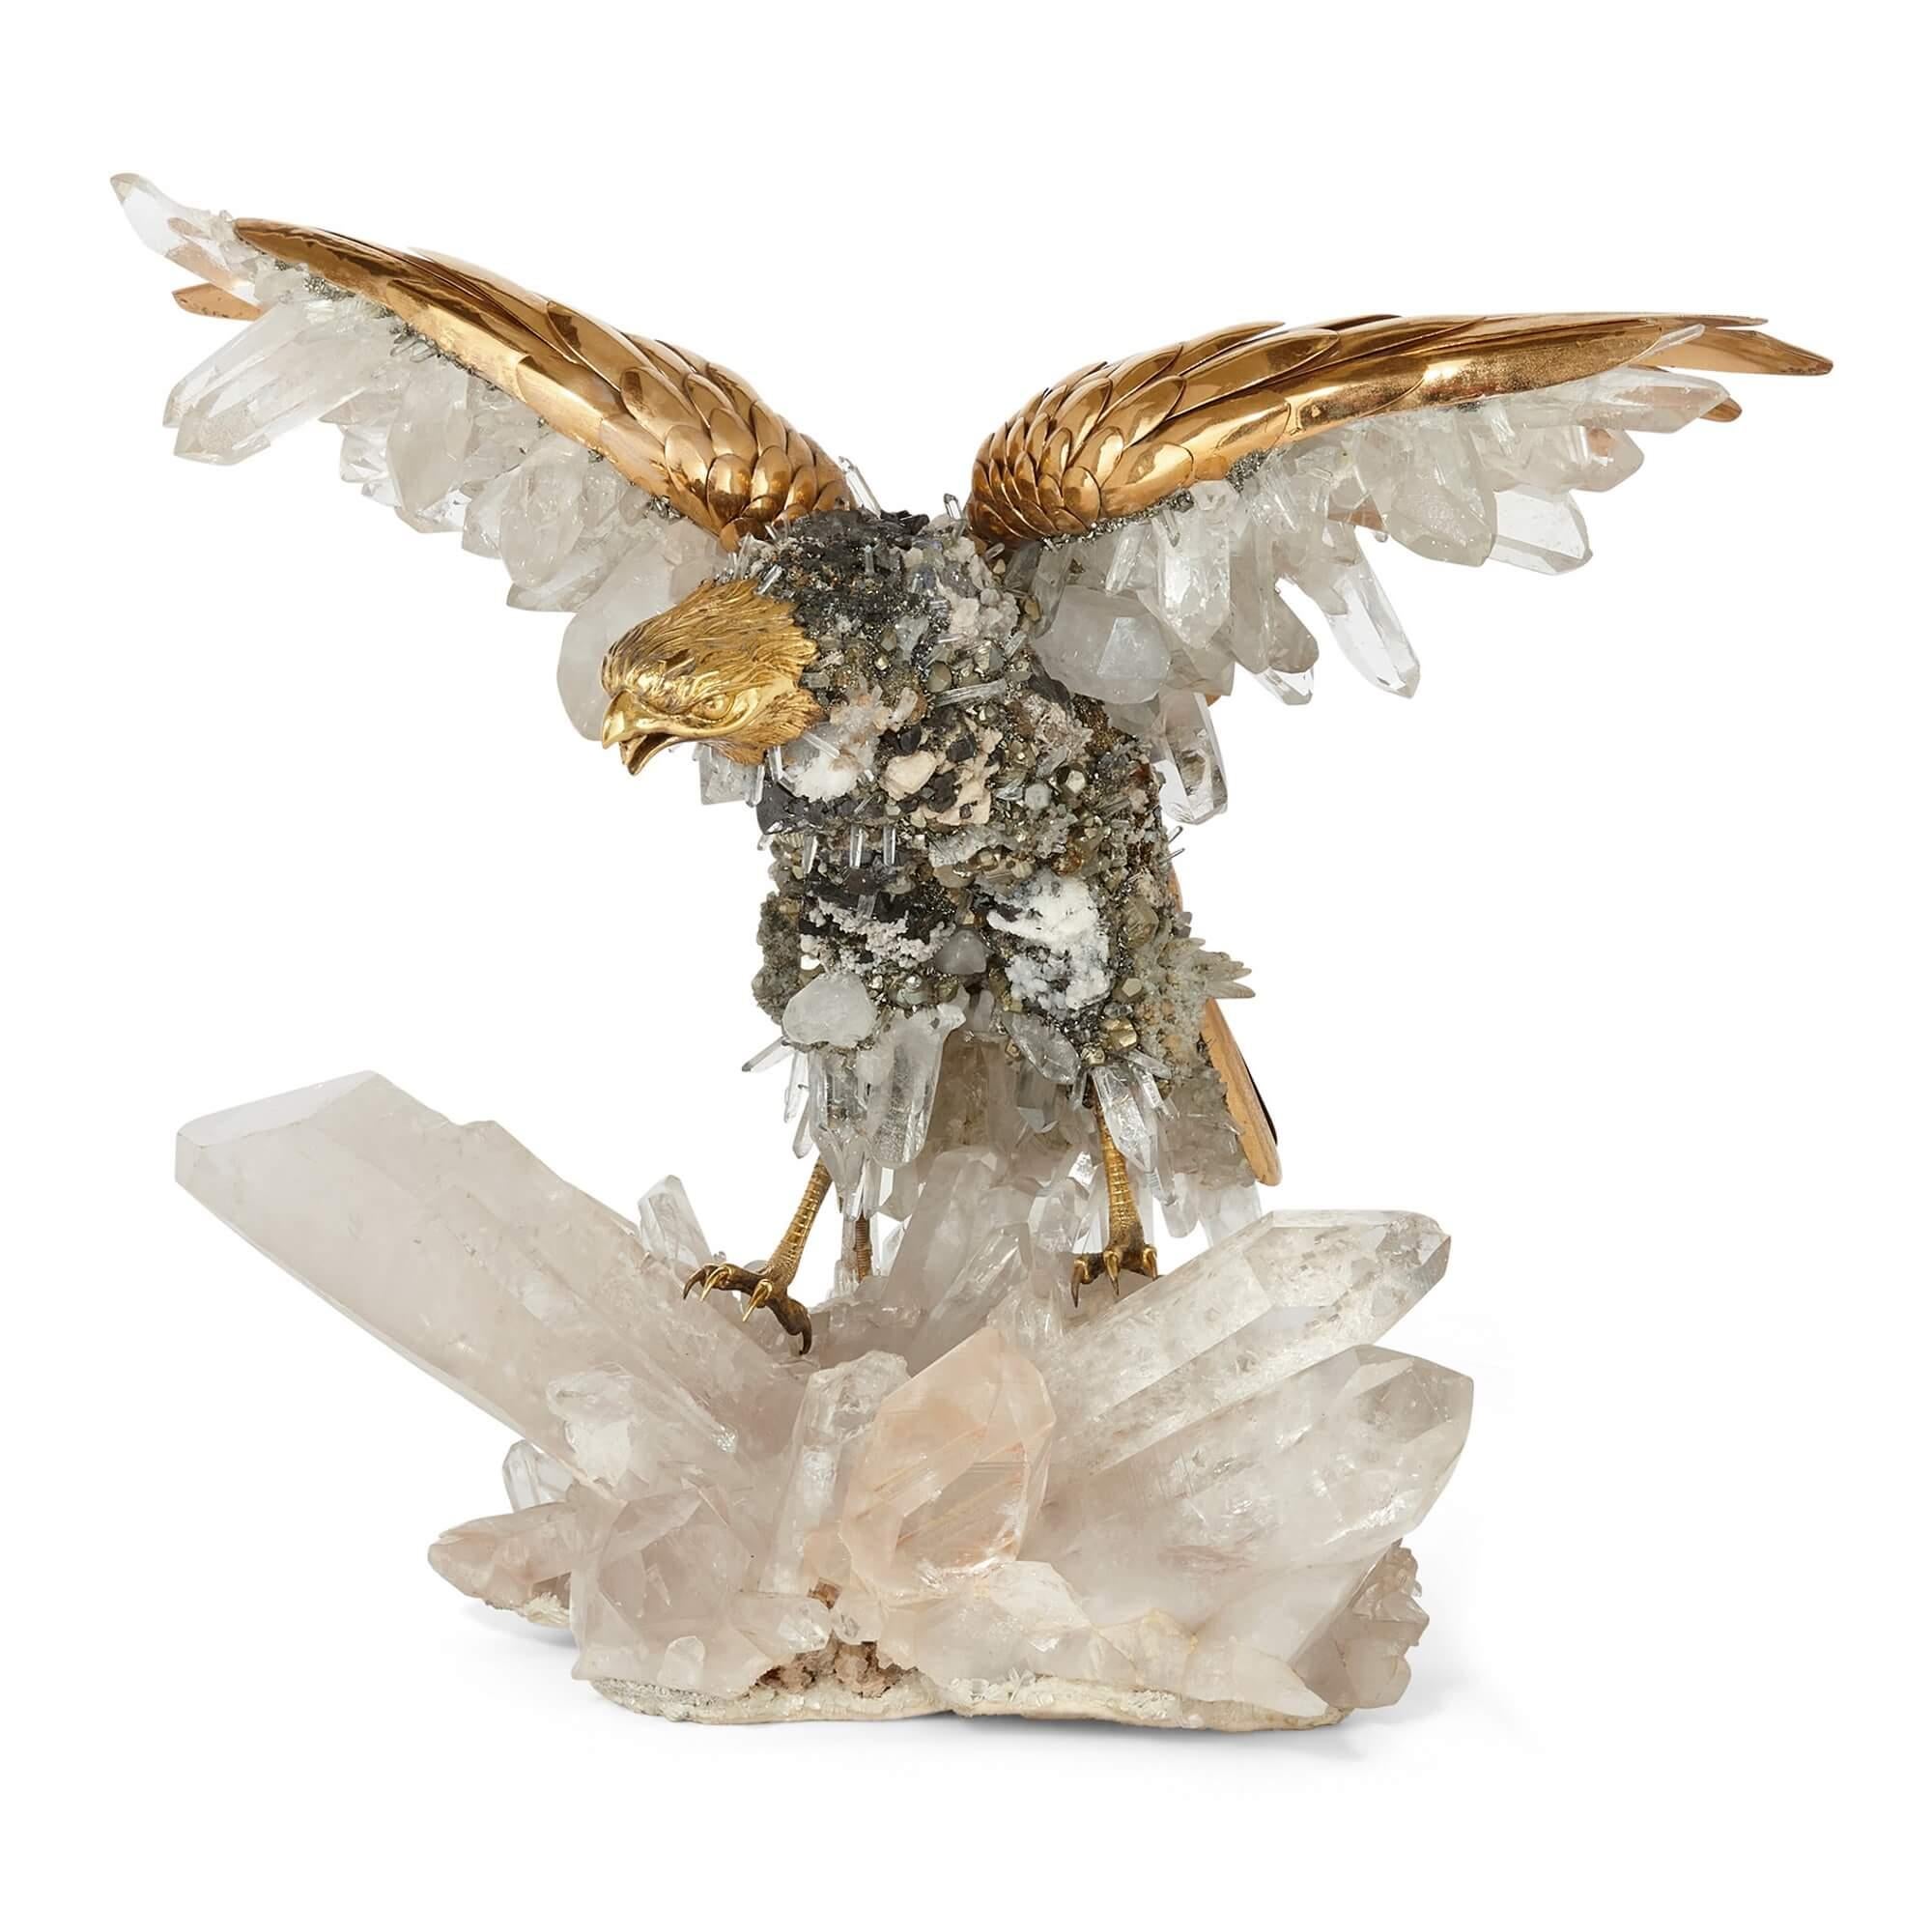 Large quartz crystal and vermeil bird model by Asprey
Swiss, c. 1975
Height 40cm, width 33cm, depth 40cm

This phenomenal piece of sculpture depicts an eagle in motion, taking off from a rocky crag made of stunning quartz crystal. 

The body of the